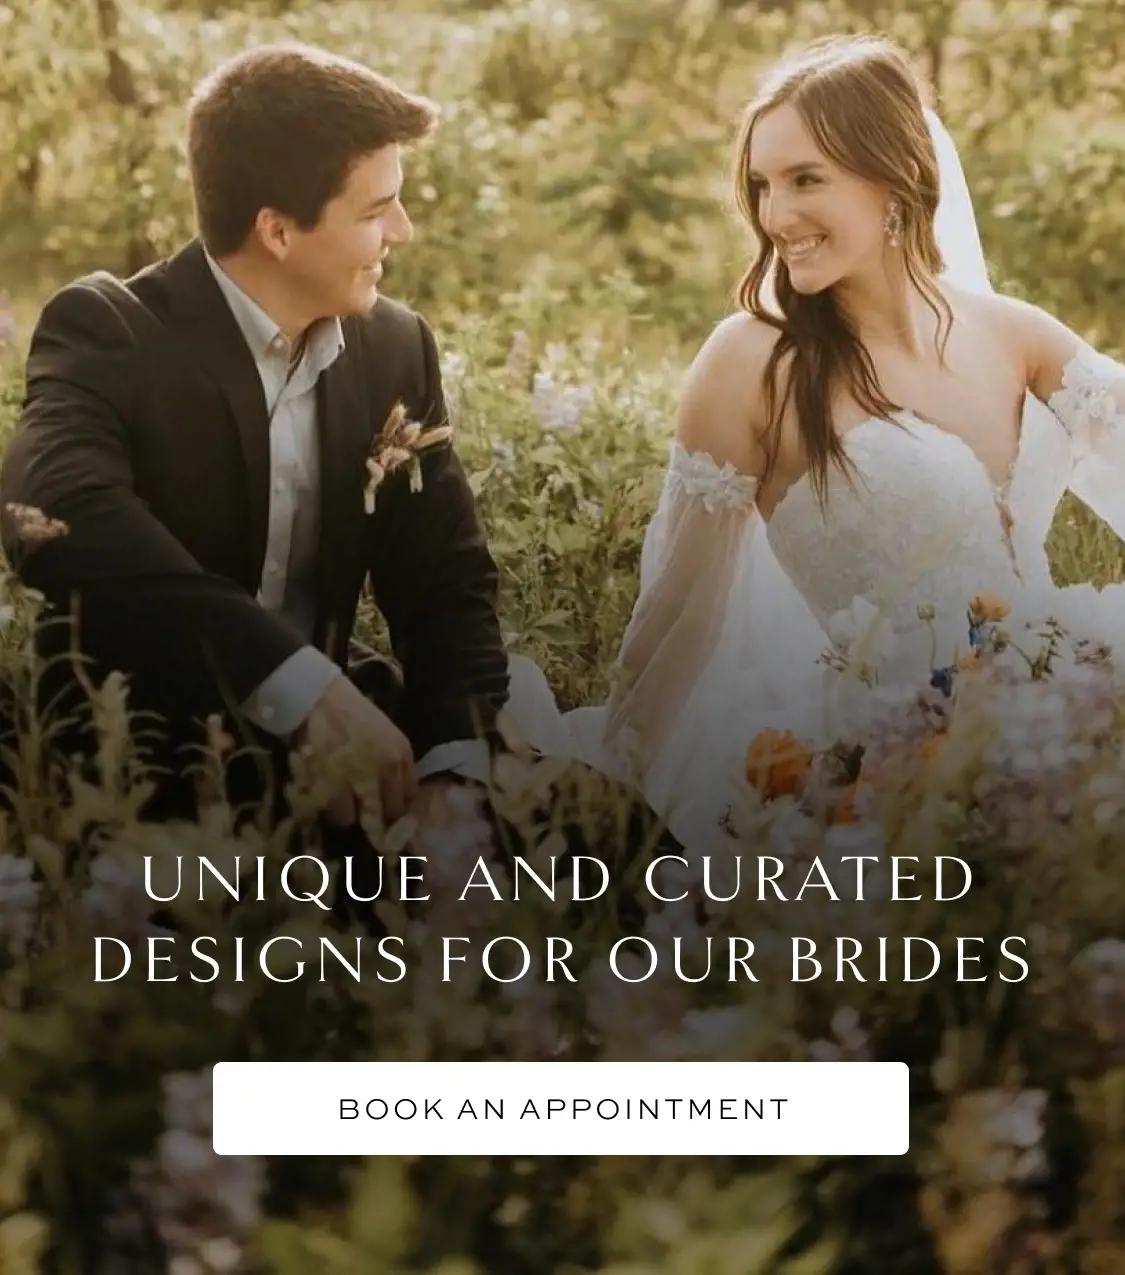 Find your dream wedding dress at Belle Amour Bridal